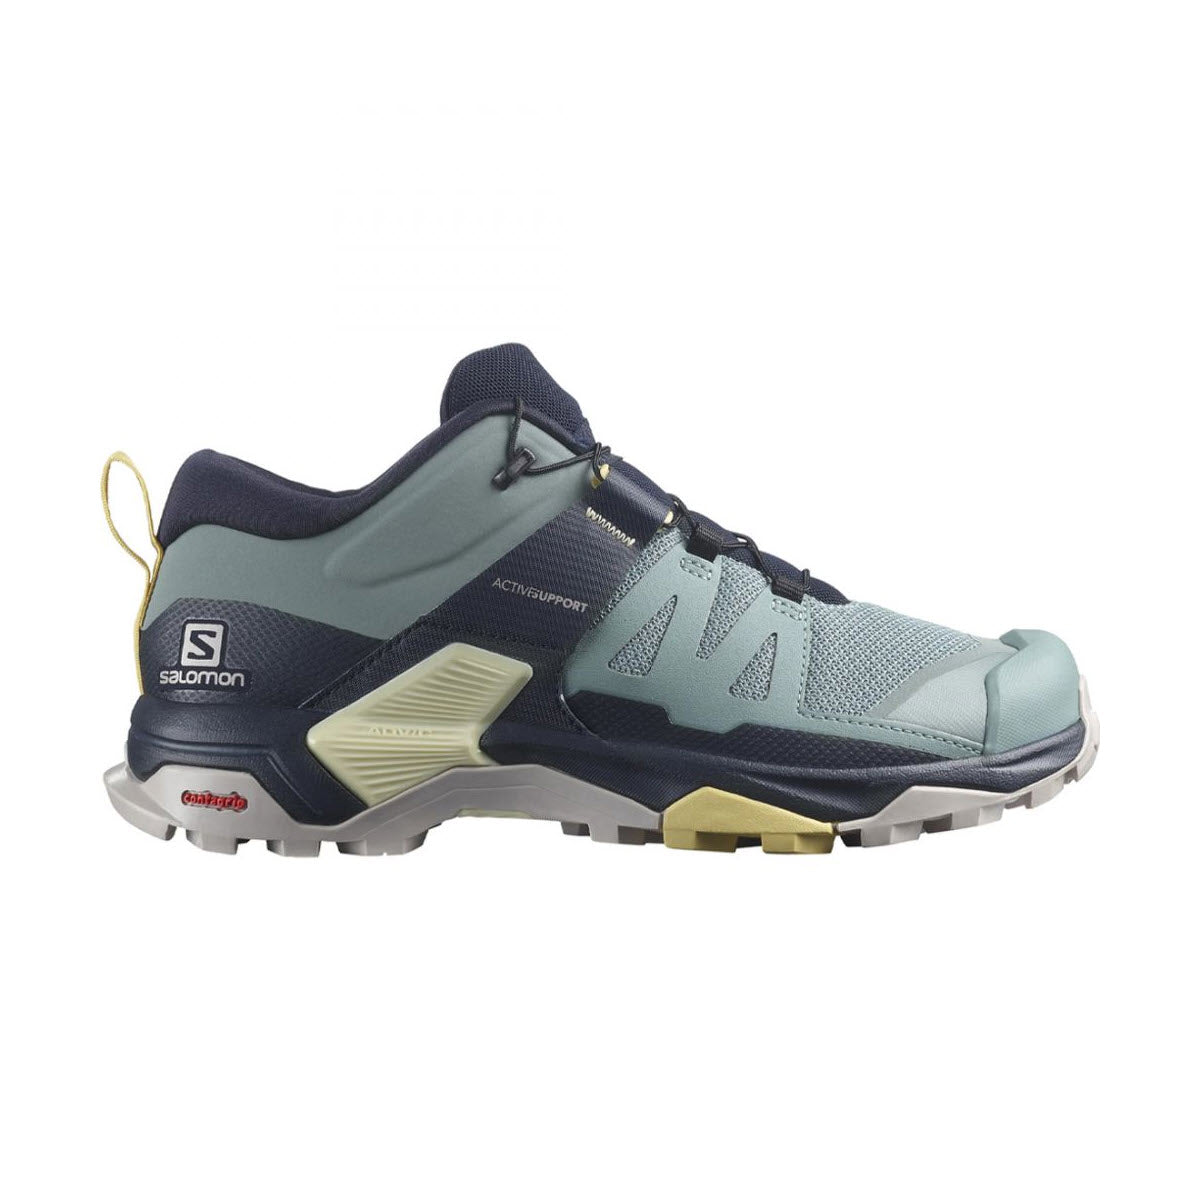 A Salomon X Ultra 4 Trooper/Night Sky/Sun Dress hiking shoe featuring a Contragrip MA outsole, mesh upper, and yellow accents.